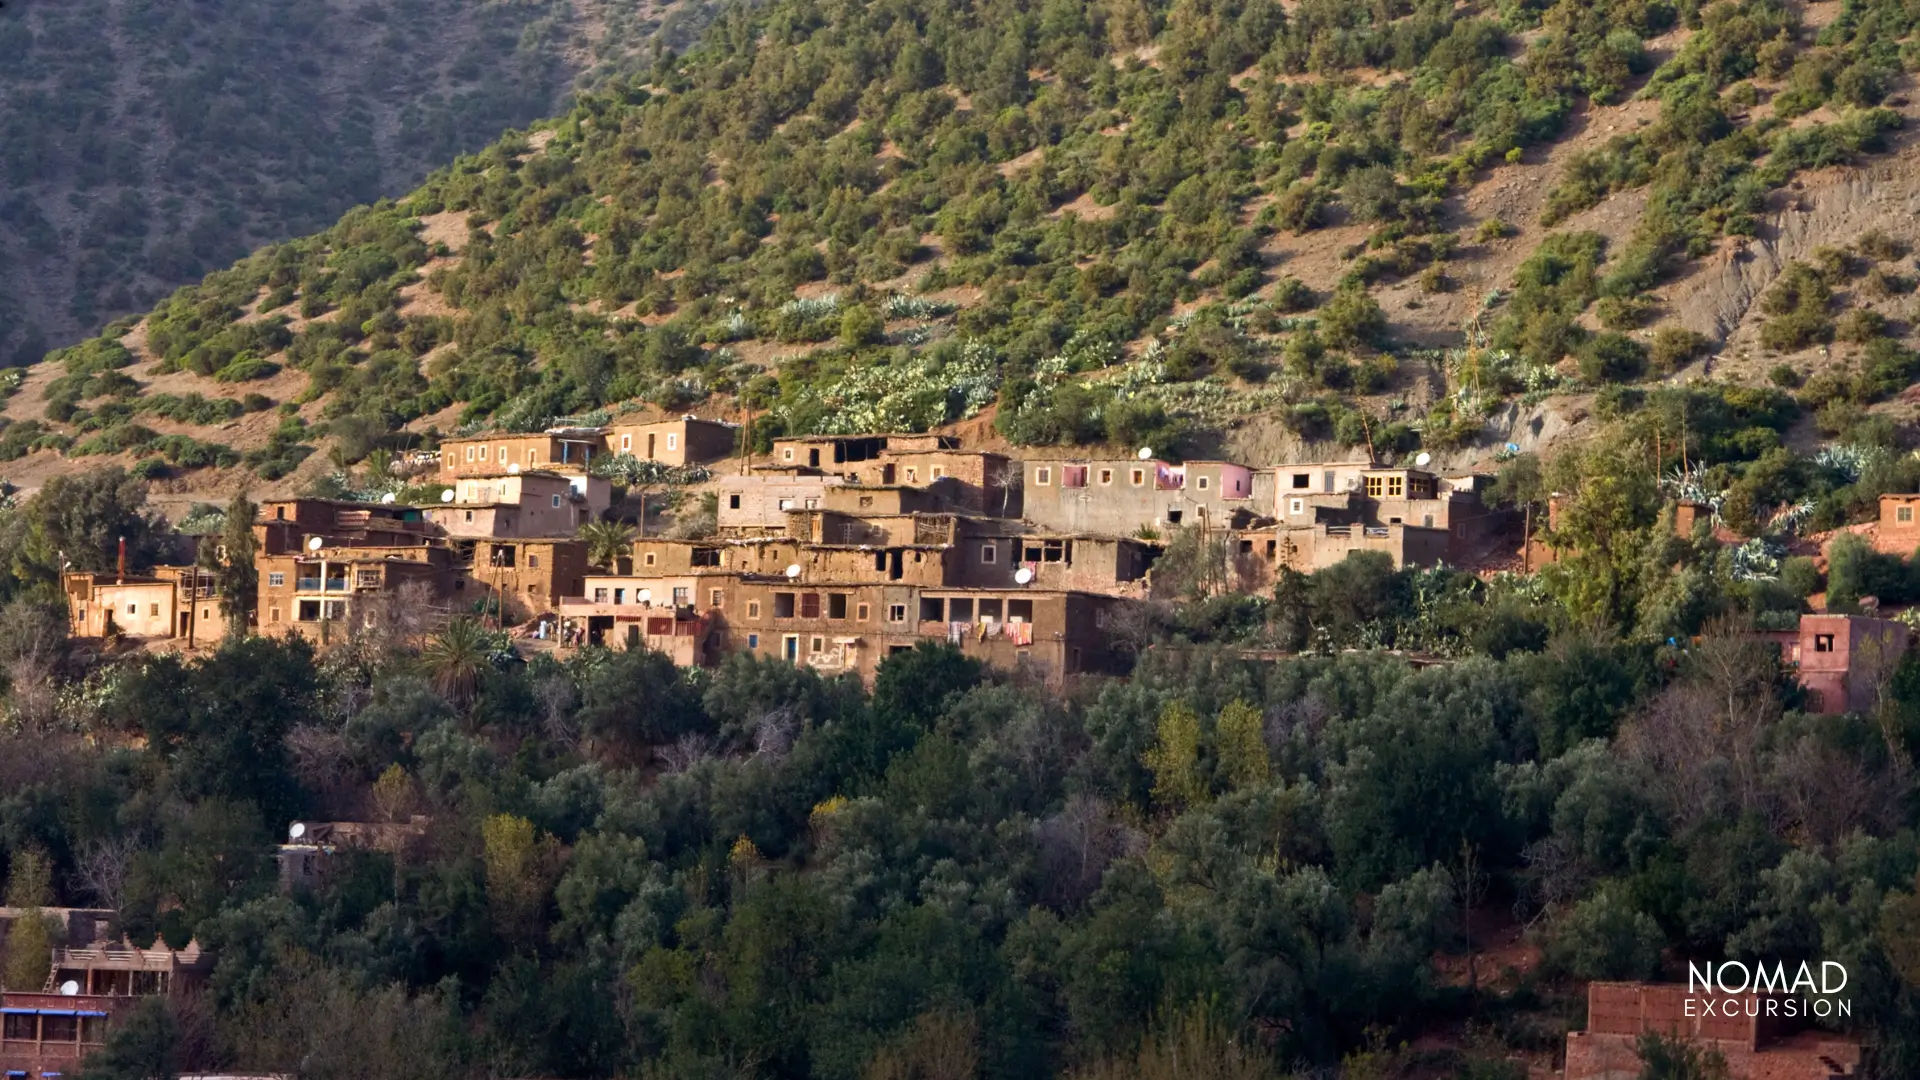 Top 10 Things to Do in Ourika Valley Berber Village, Morocco